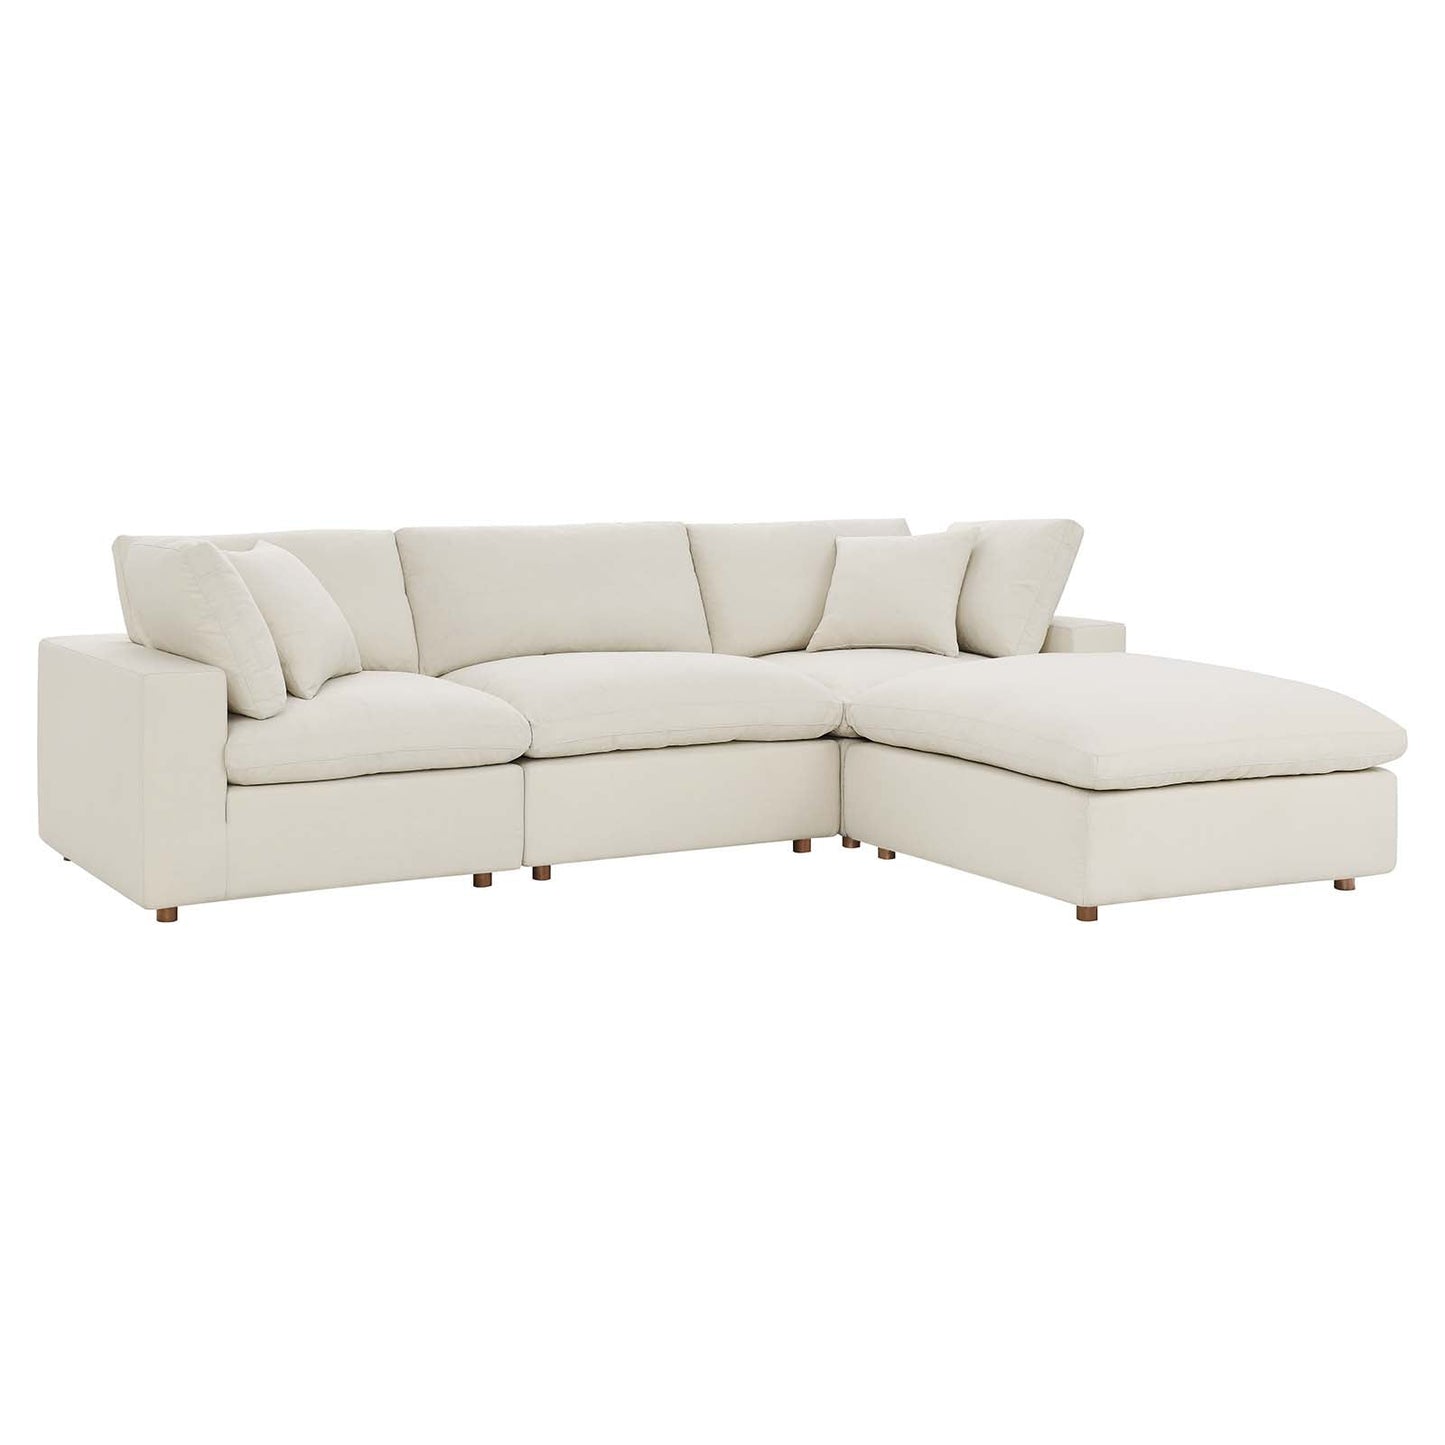 Connie Down Filled Overstuffed 4 Piece Sectional Sofa Set